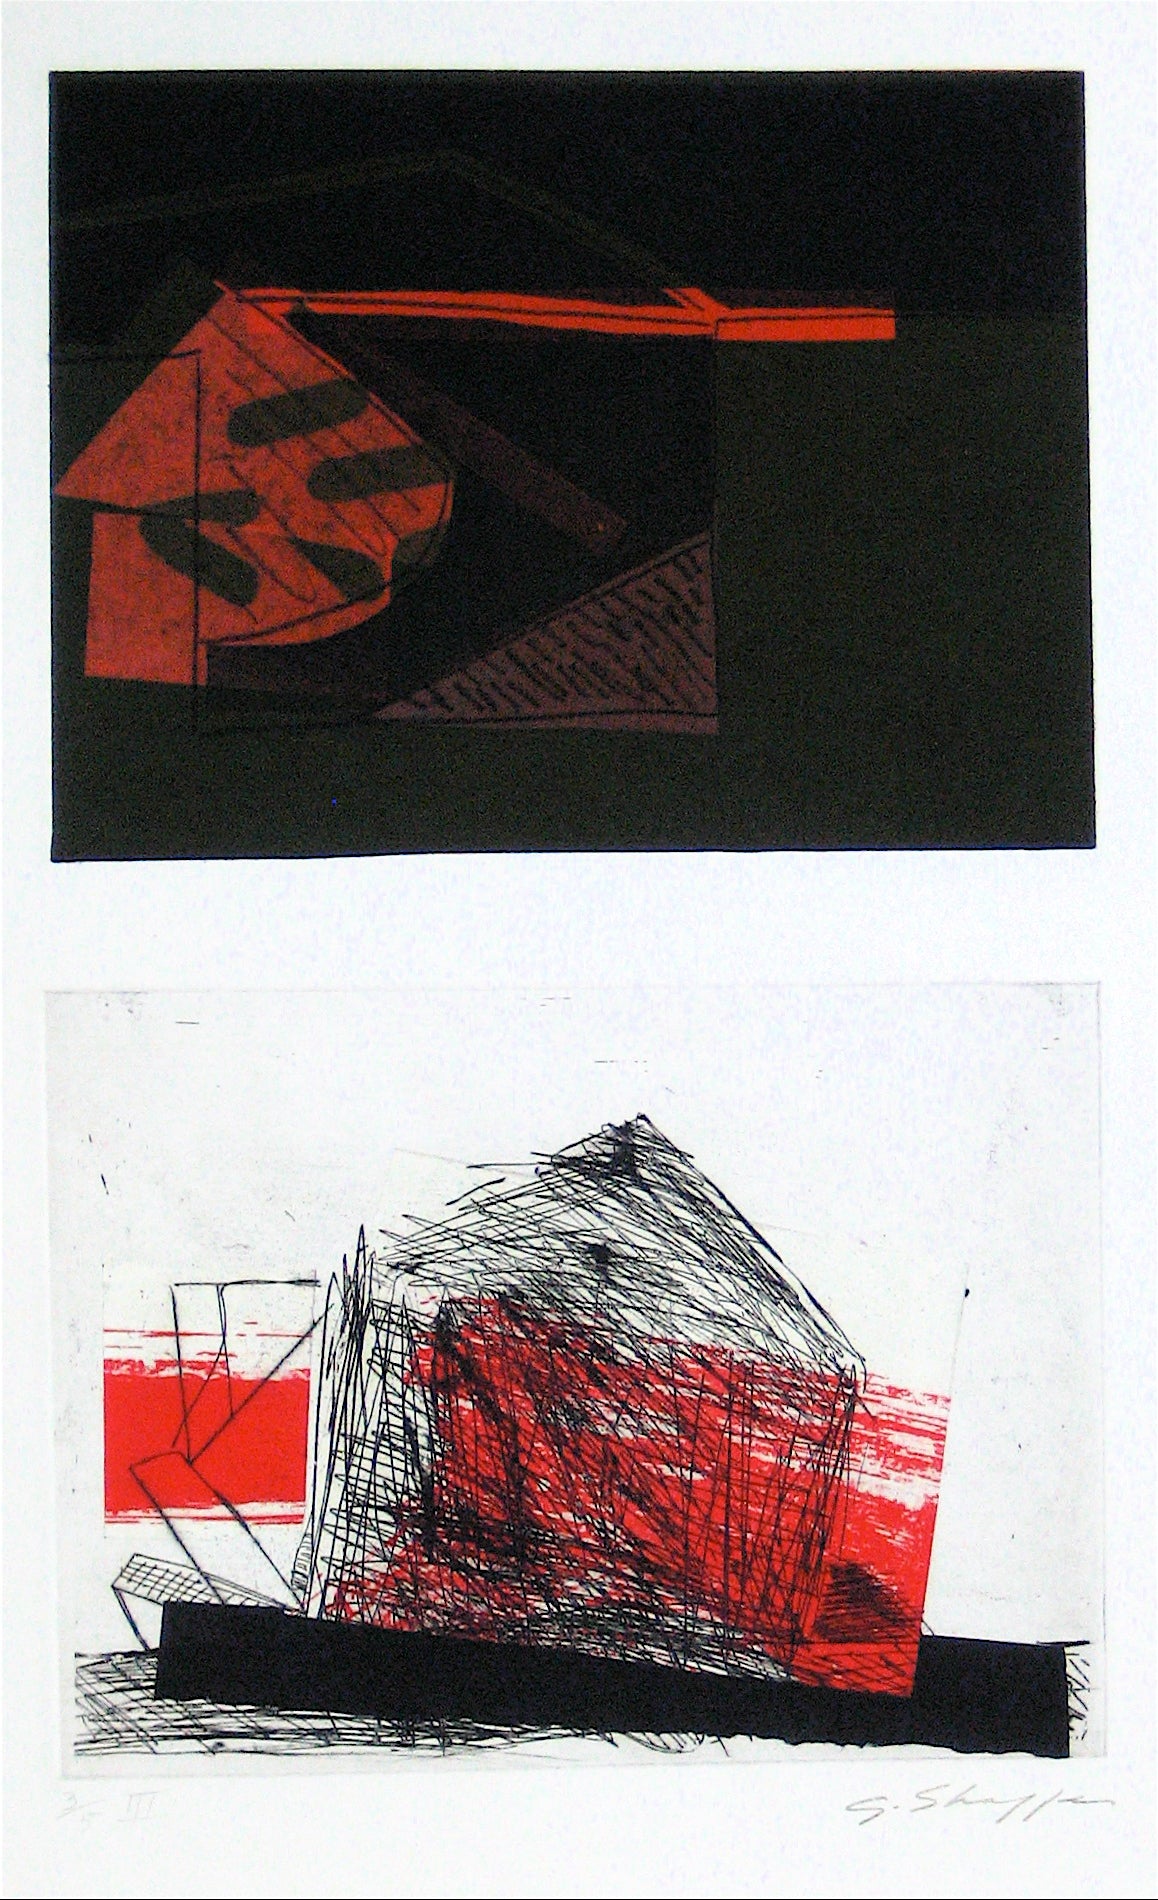 Abstracted Duel Image <br>1989 Litho & Chine Colle <br><br>#11773